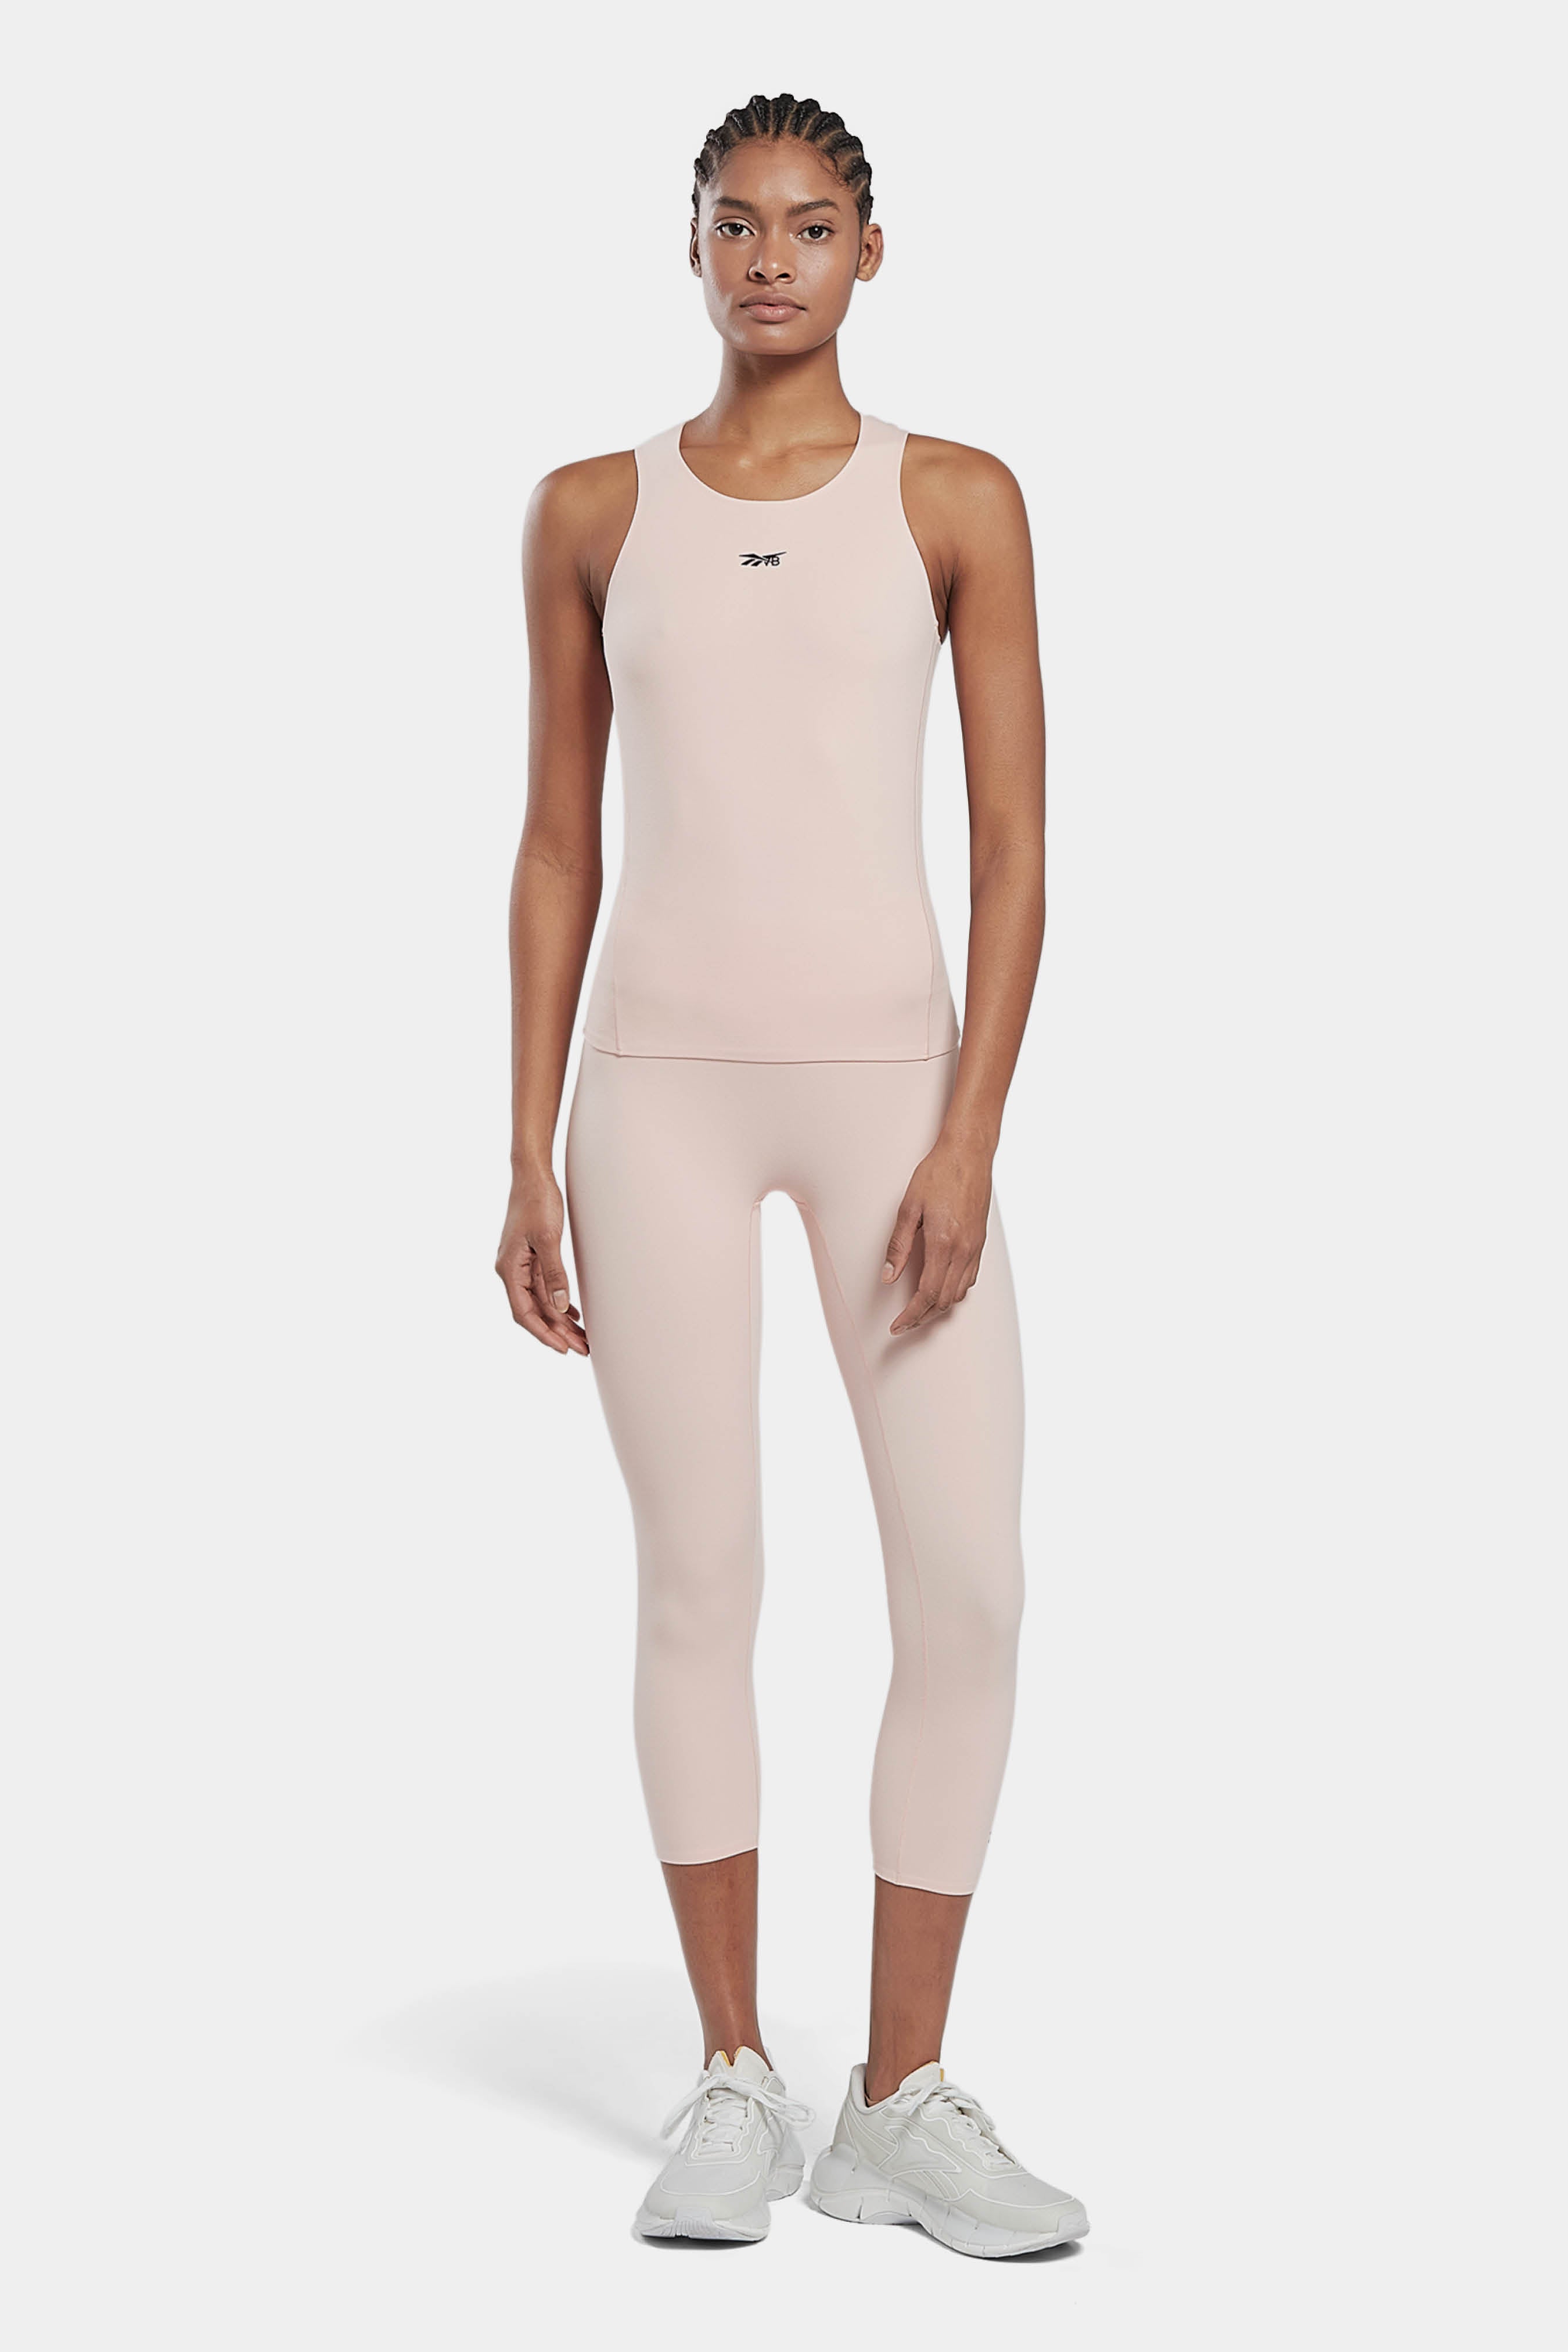 Reebok x VB Fitted Tank in Coral Glow – Beckham US